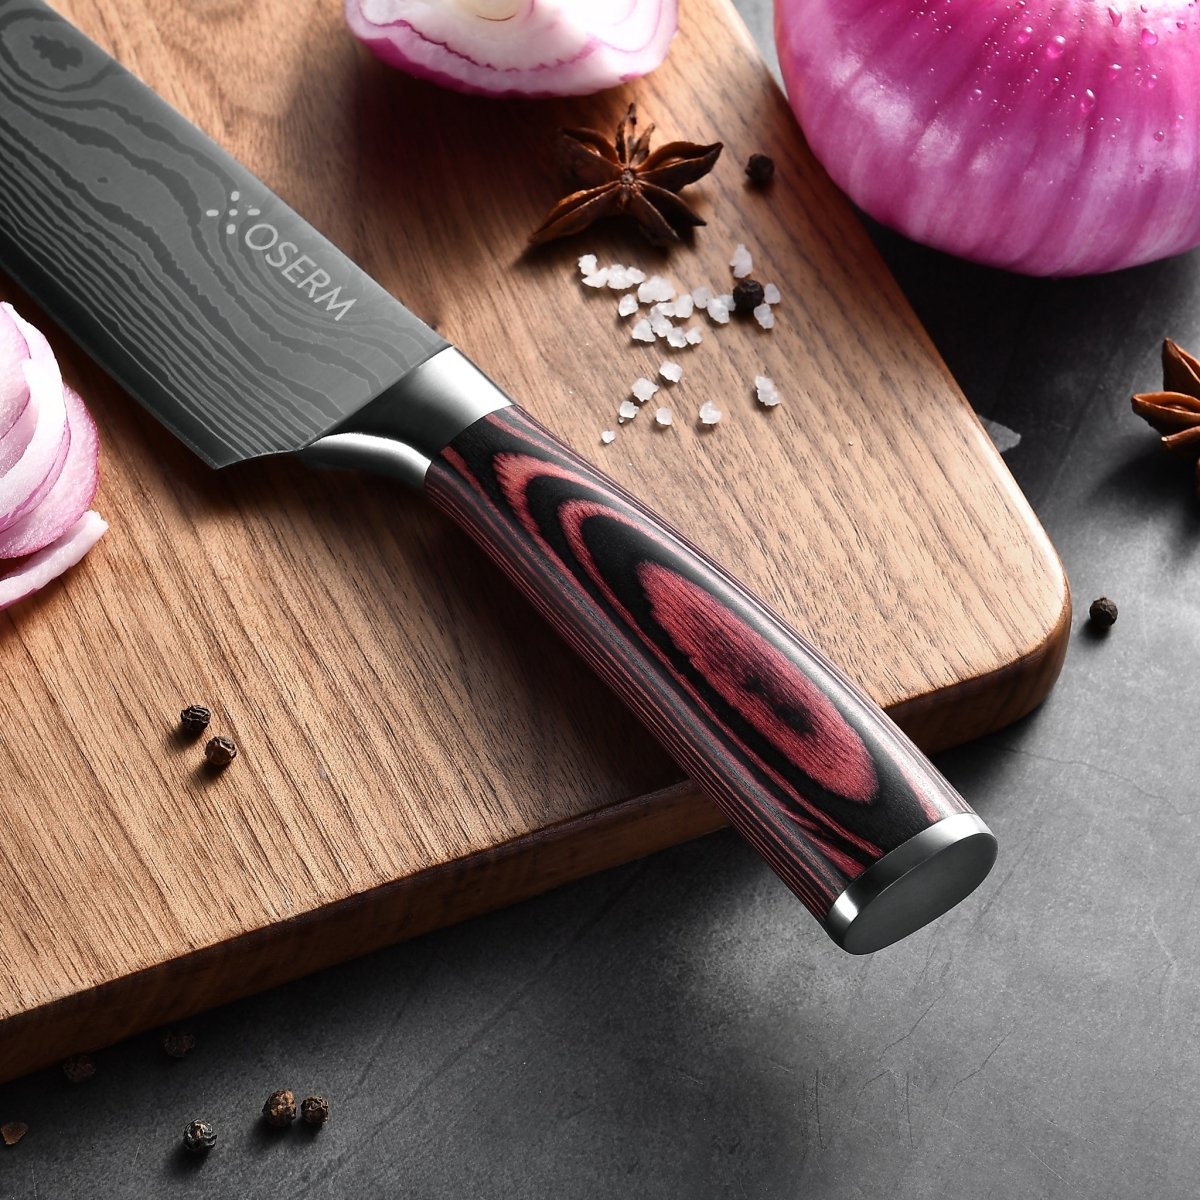 OSERM 8'' Japanese Chef Knife: Ultra-Sharp High Carbon Stainless Steel with Pakkawood Handle & Beautiful Gift Box